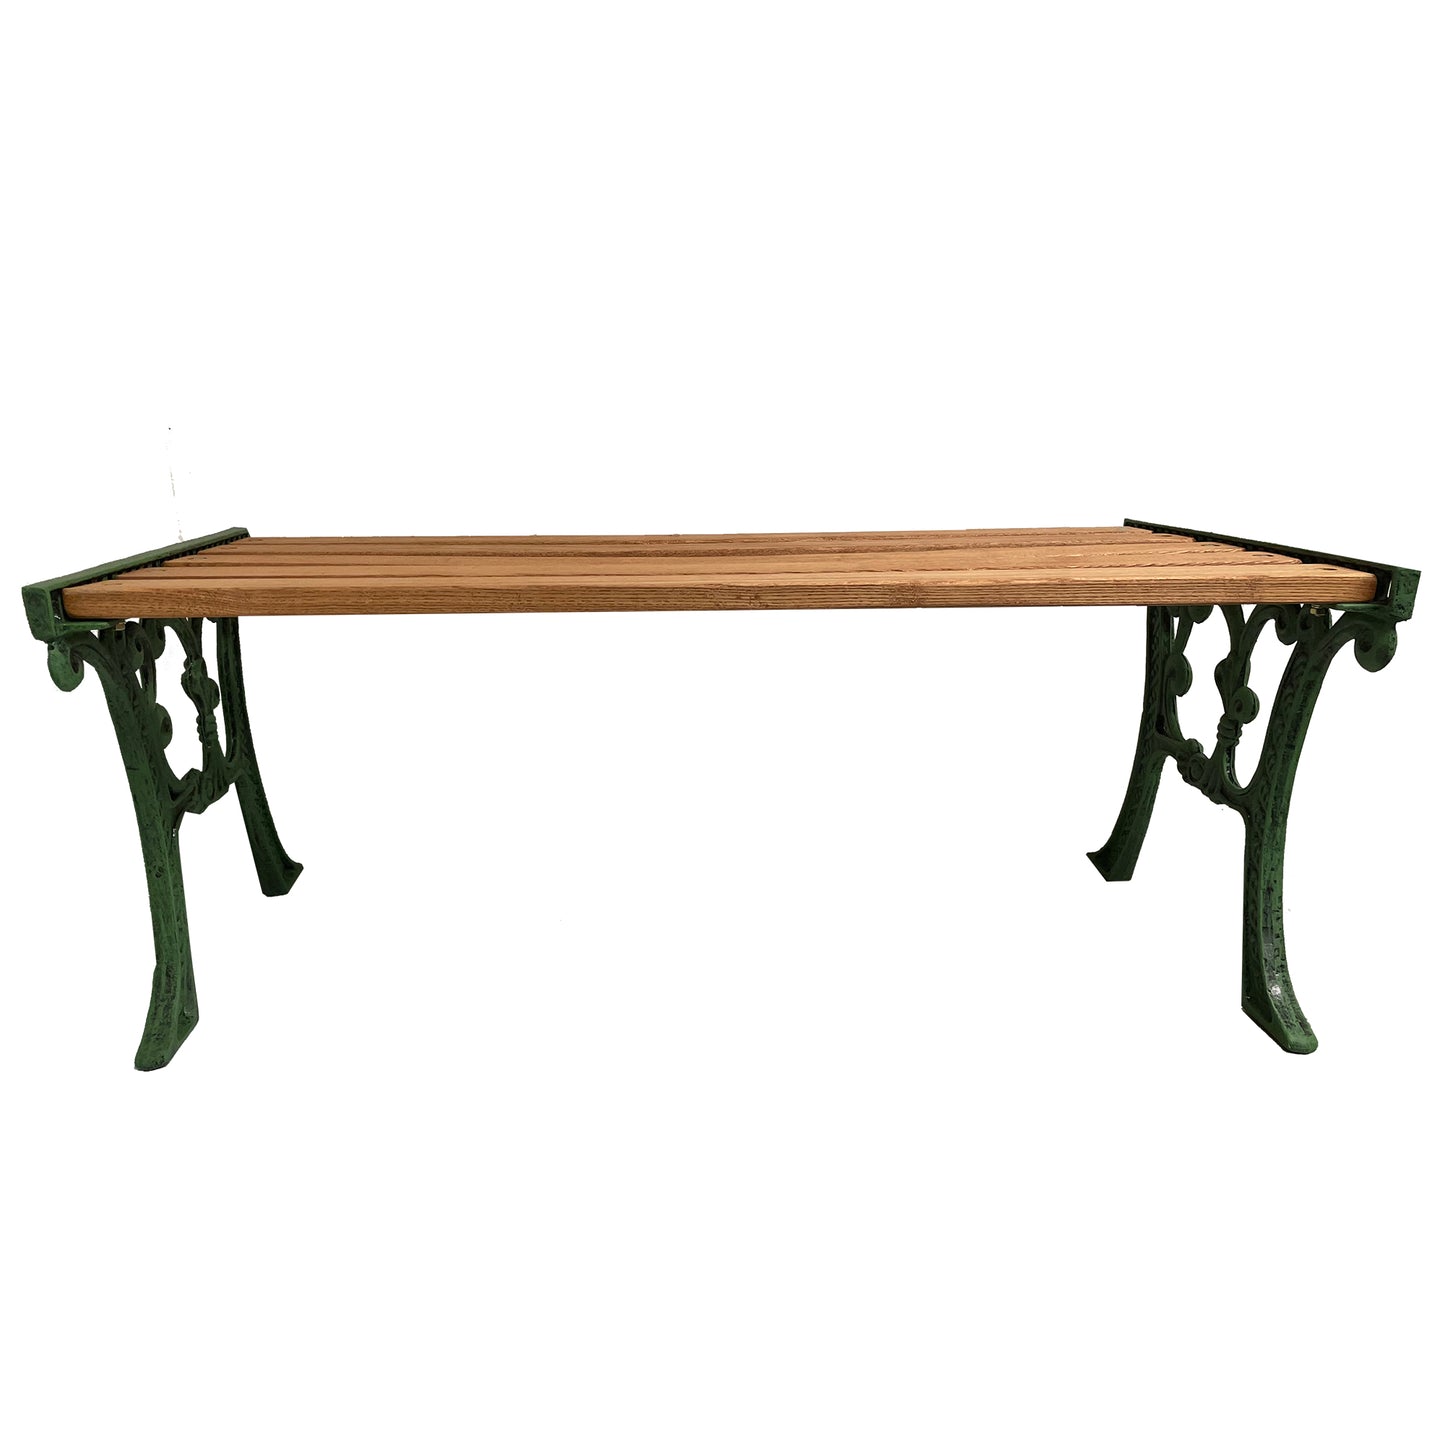 Cast Aluminum and Wood Antique Green Ornate Rectangular Coffee Table